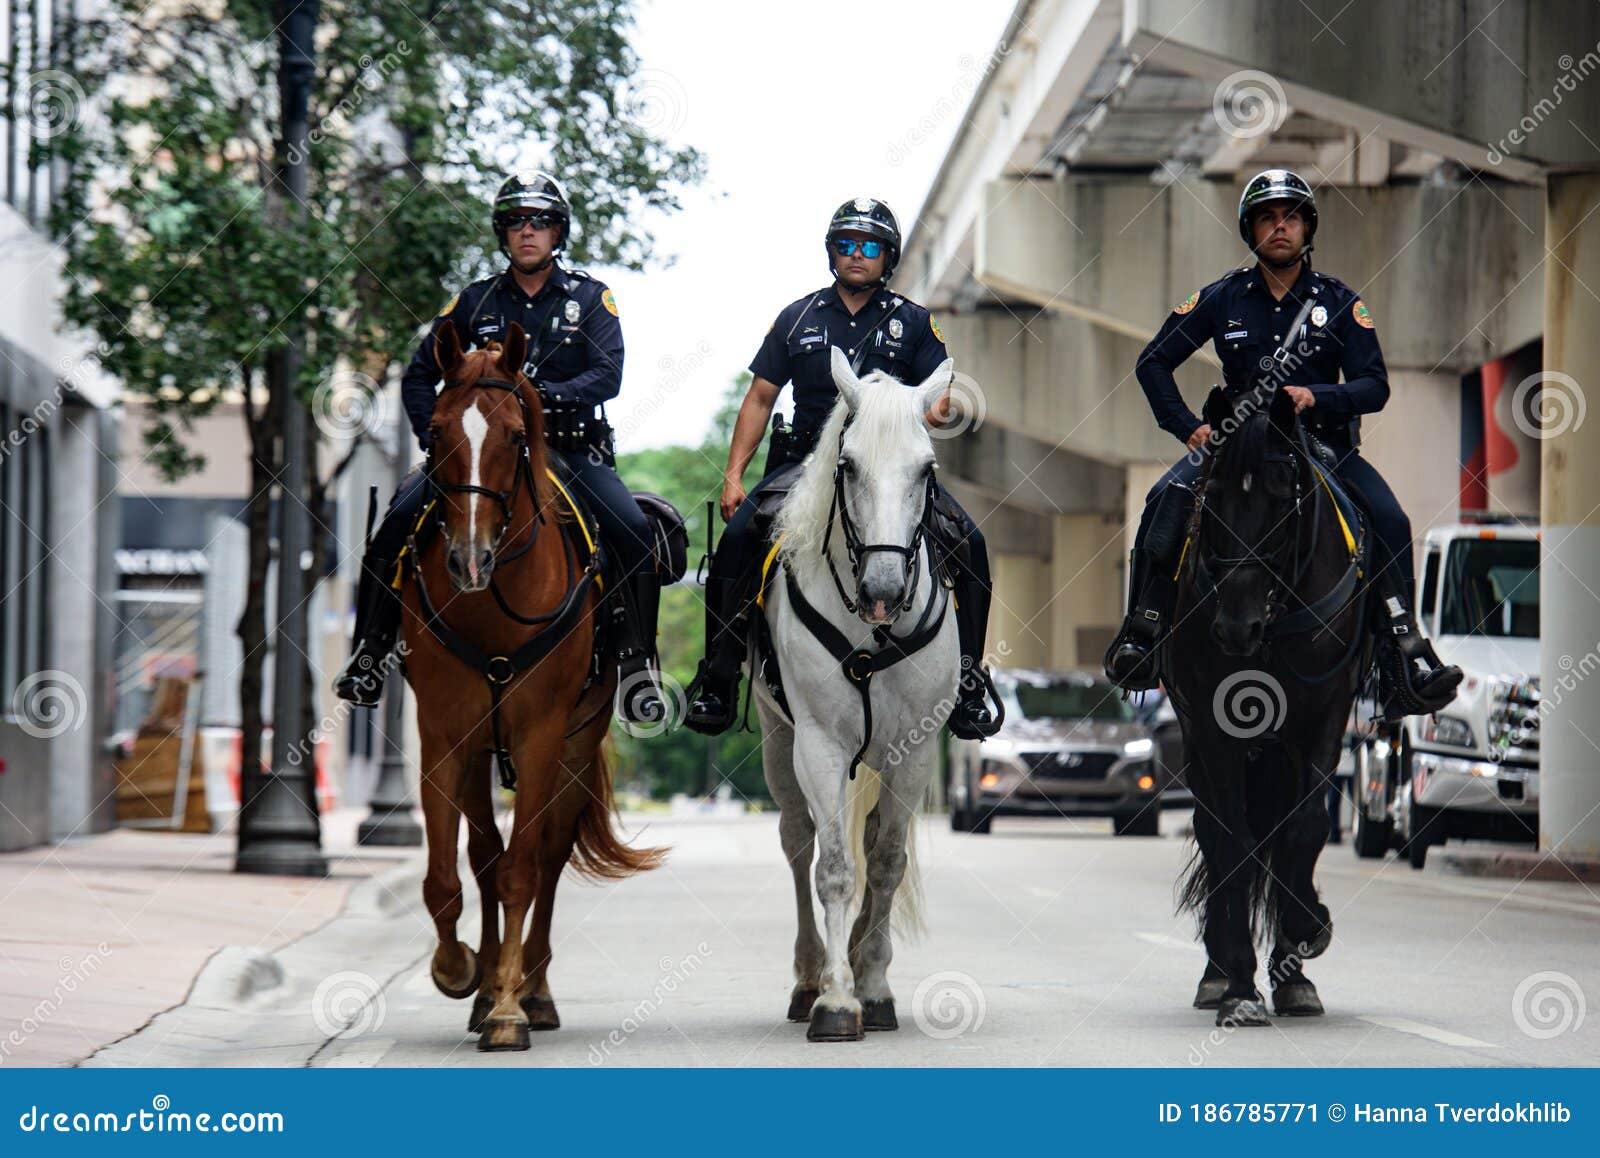 Miami Downtown, FL, USA - JUNE 4, 2020: Police Officers on Horseback.  Mounted Police. Editorial Photo - Image of horse, riding: 186785771